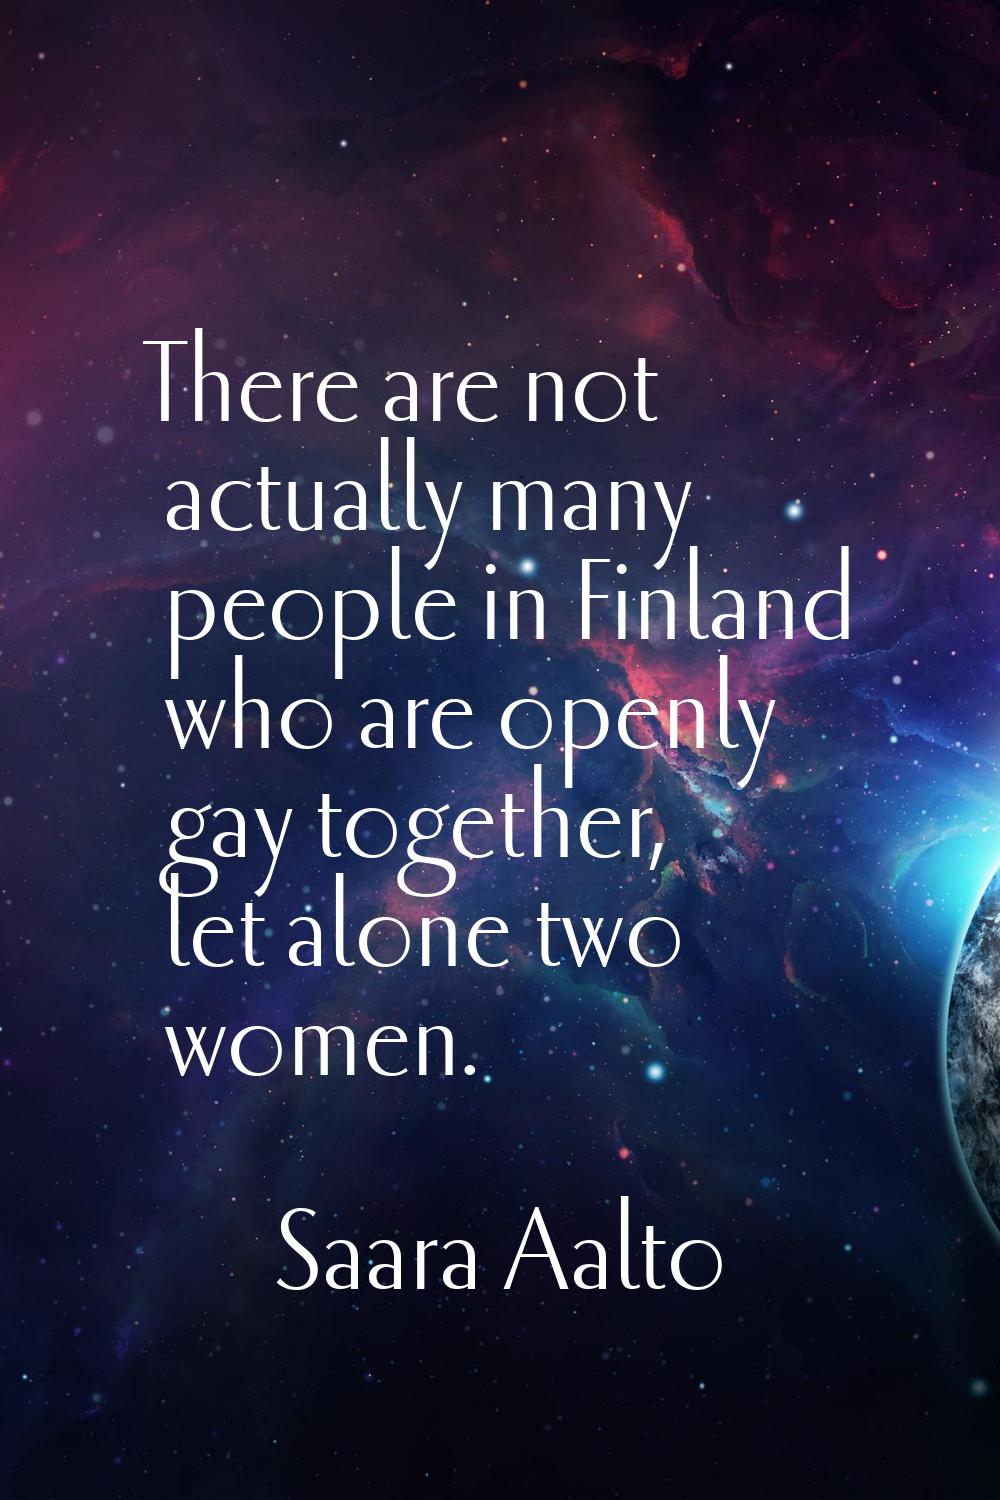 There are not actually many people in Finland who are openly gay together, let alone two women.